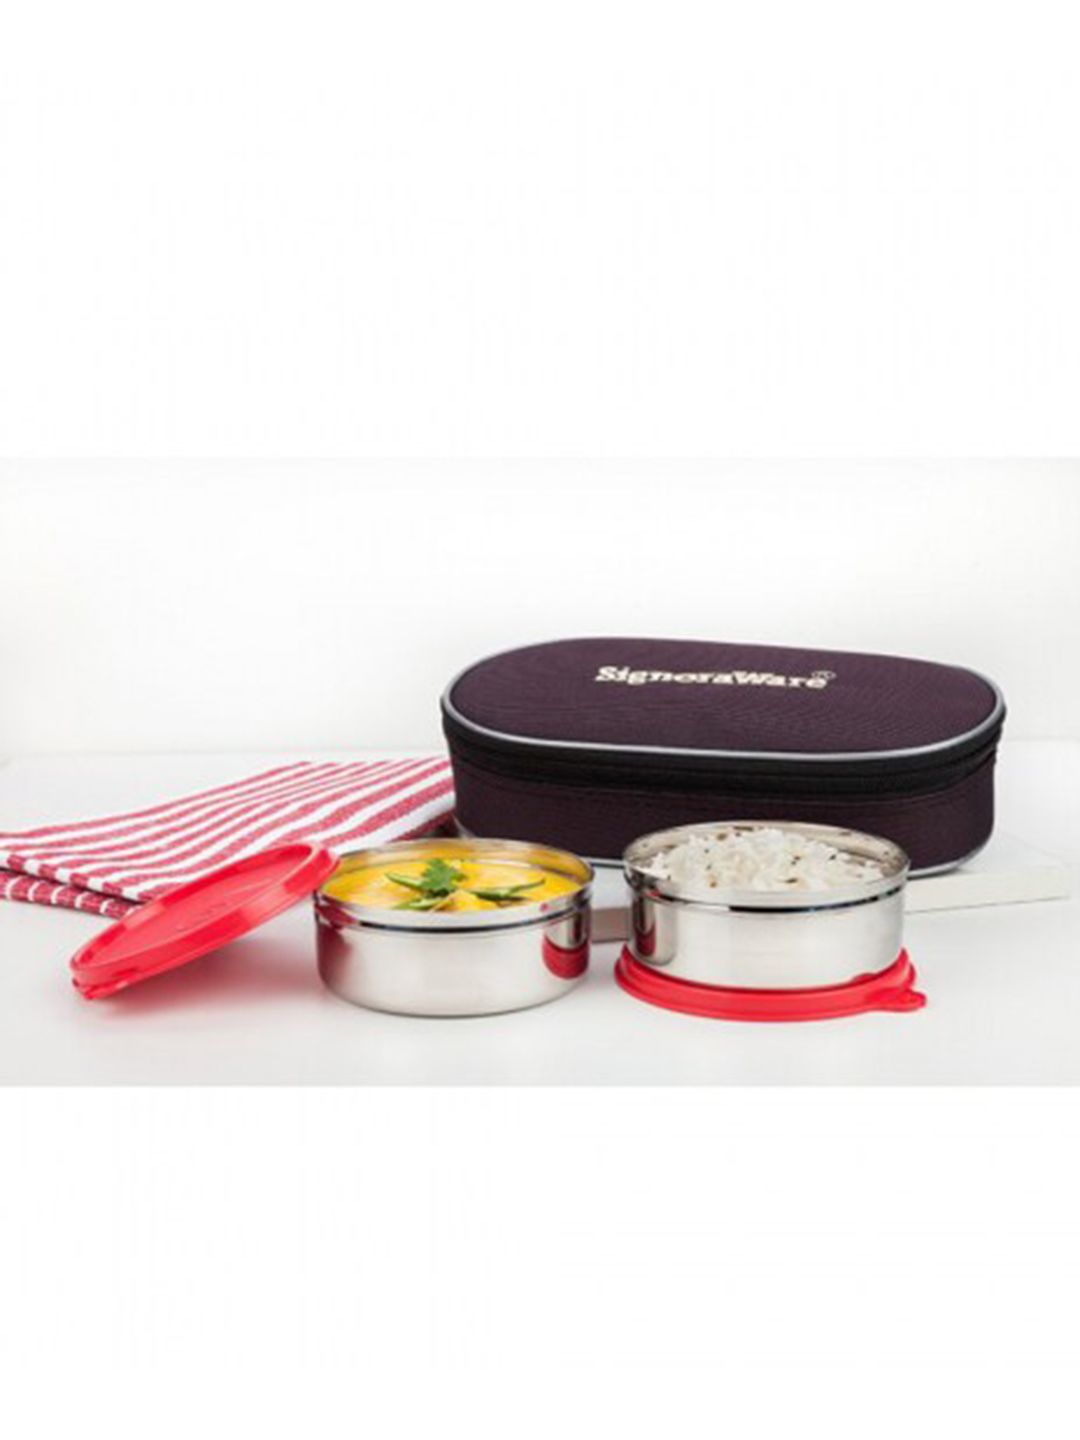 SignoraWare Red Solid Stainless Steel Lunch Box- 350ML Price in India